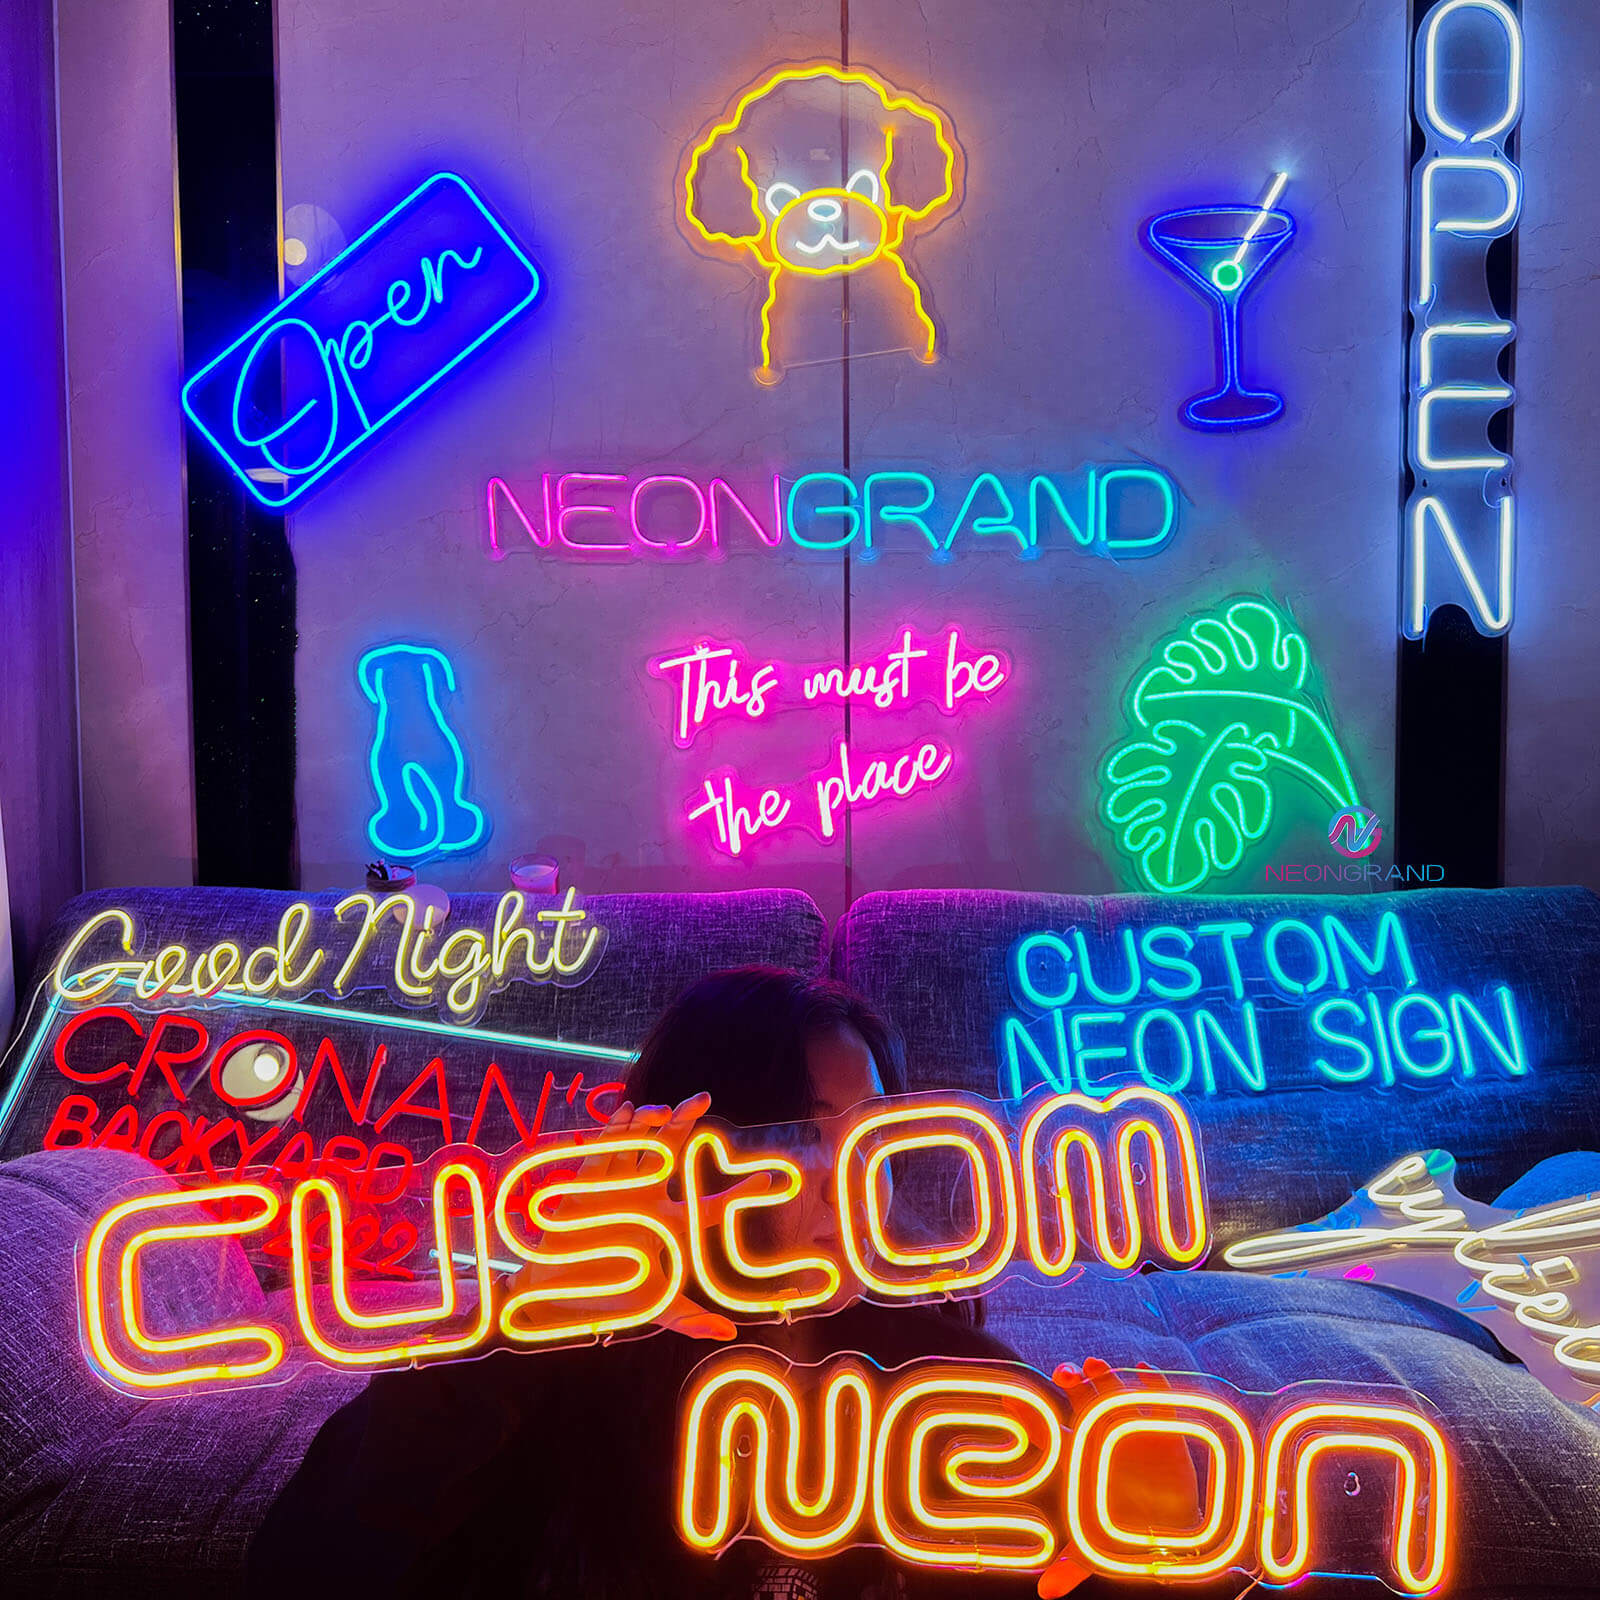 neon sign font